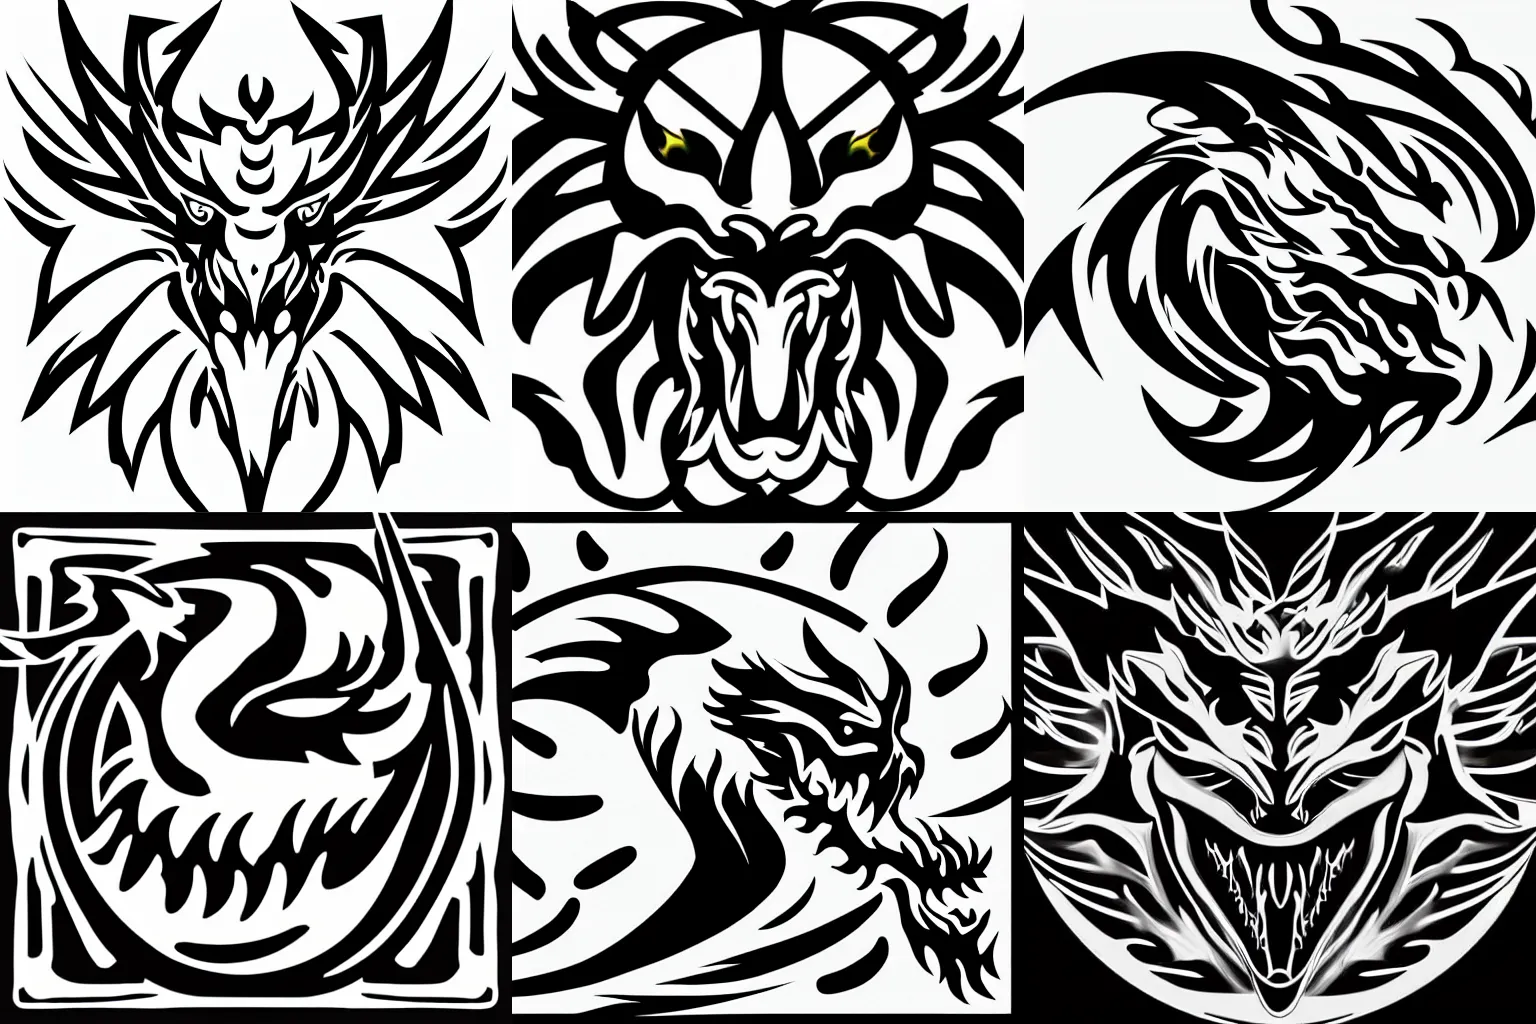 Prompt: dragon head close up looking at you breathing fire toward camera, logo vector art rectangular format, black and white